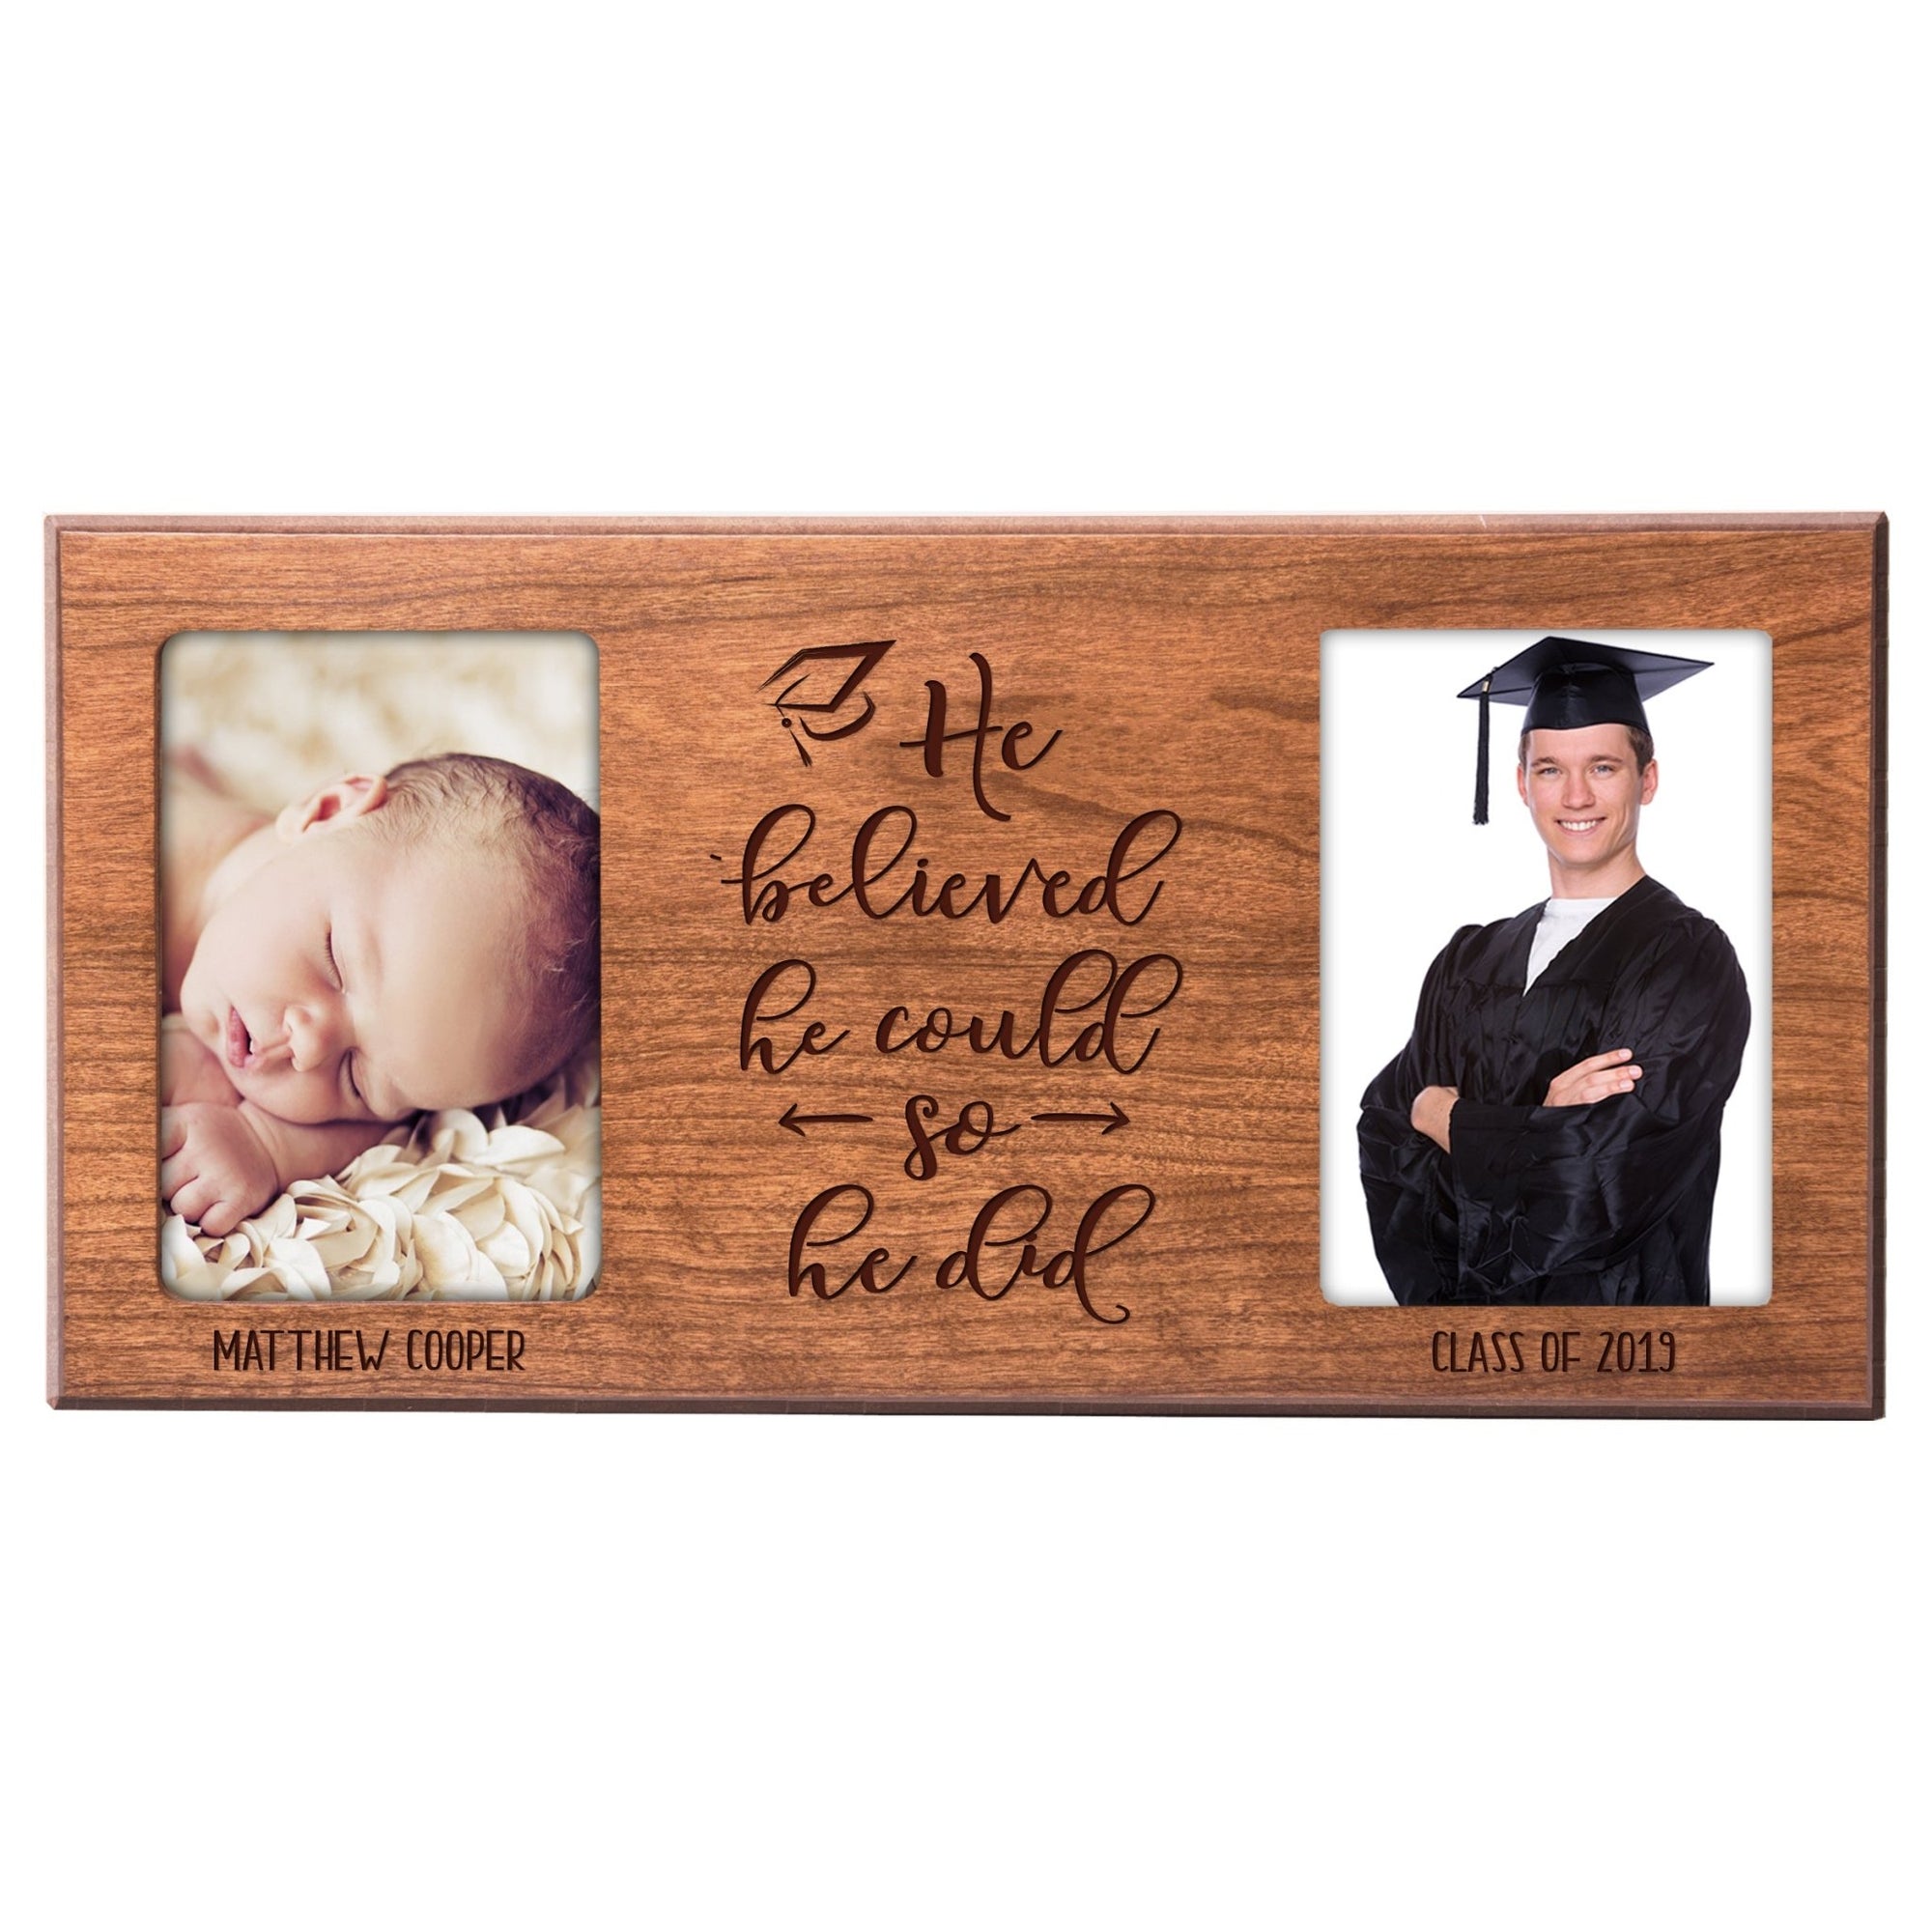 Personalized Graduation Double Photo Frame Gift - He Believed - LifeSong Milestones